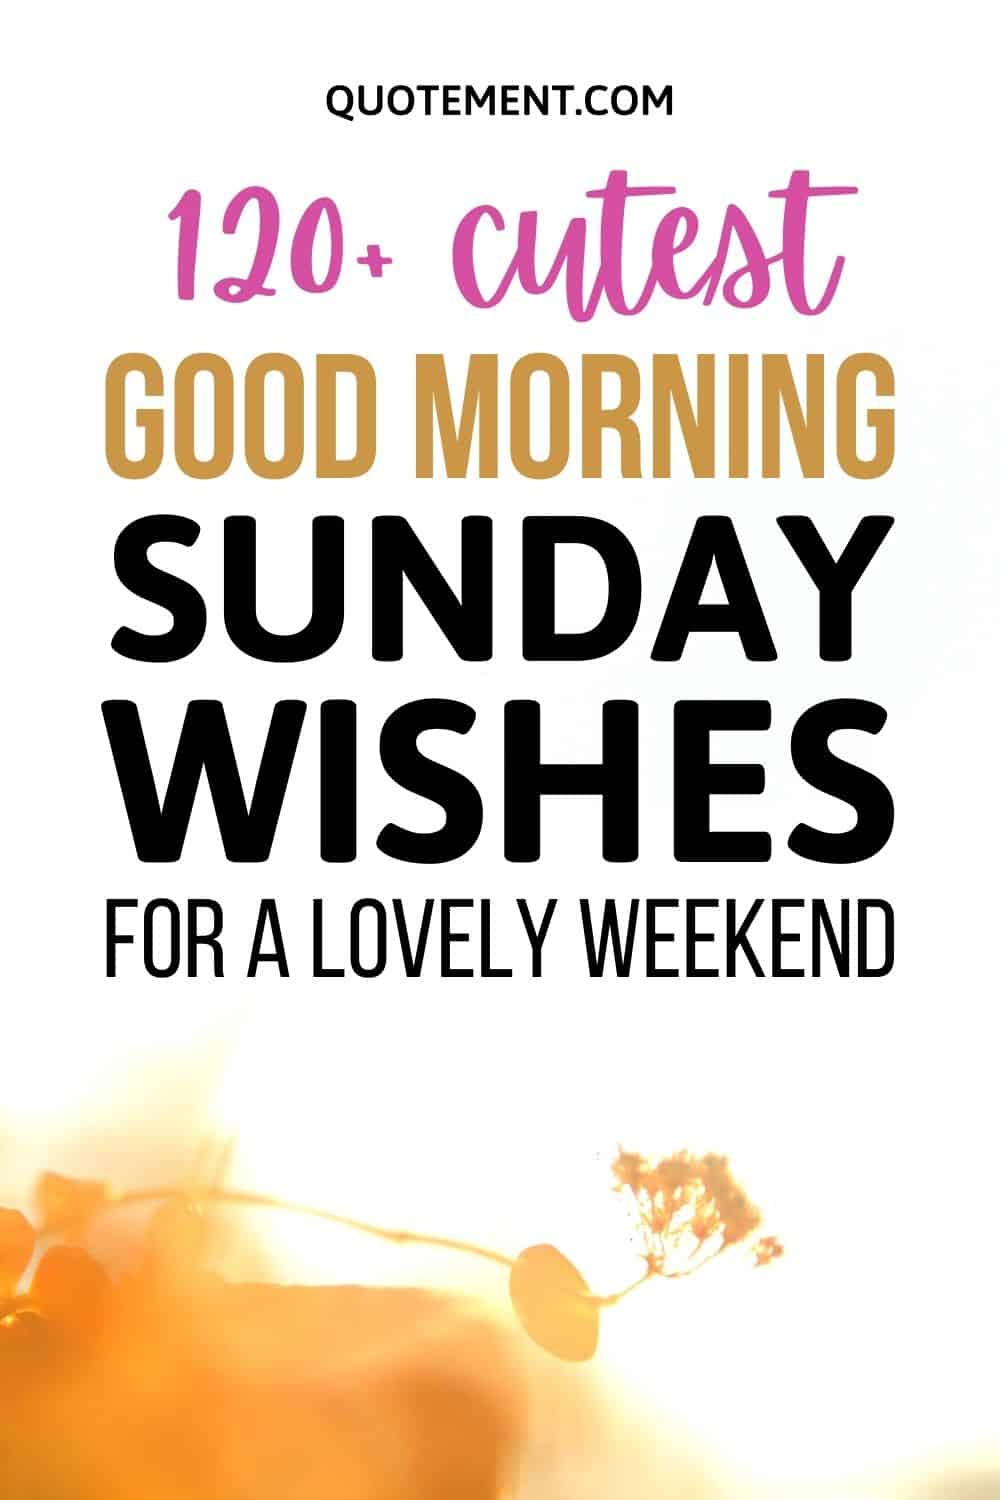 120 + Cutest Good Morning Sunday Wishes For A Lovely Weekend